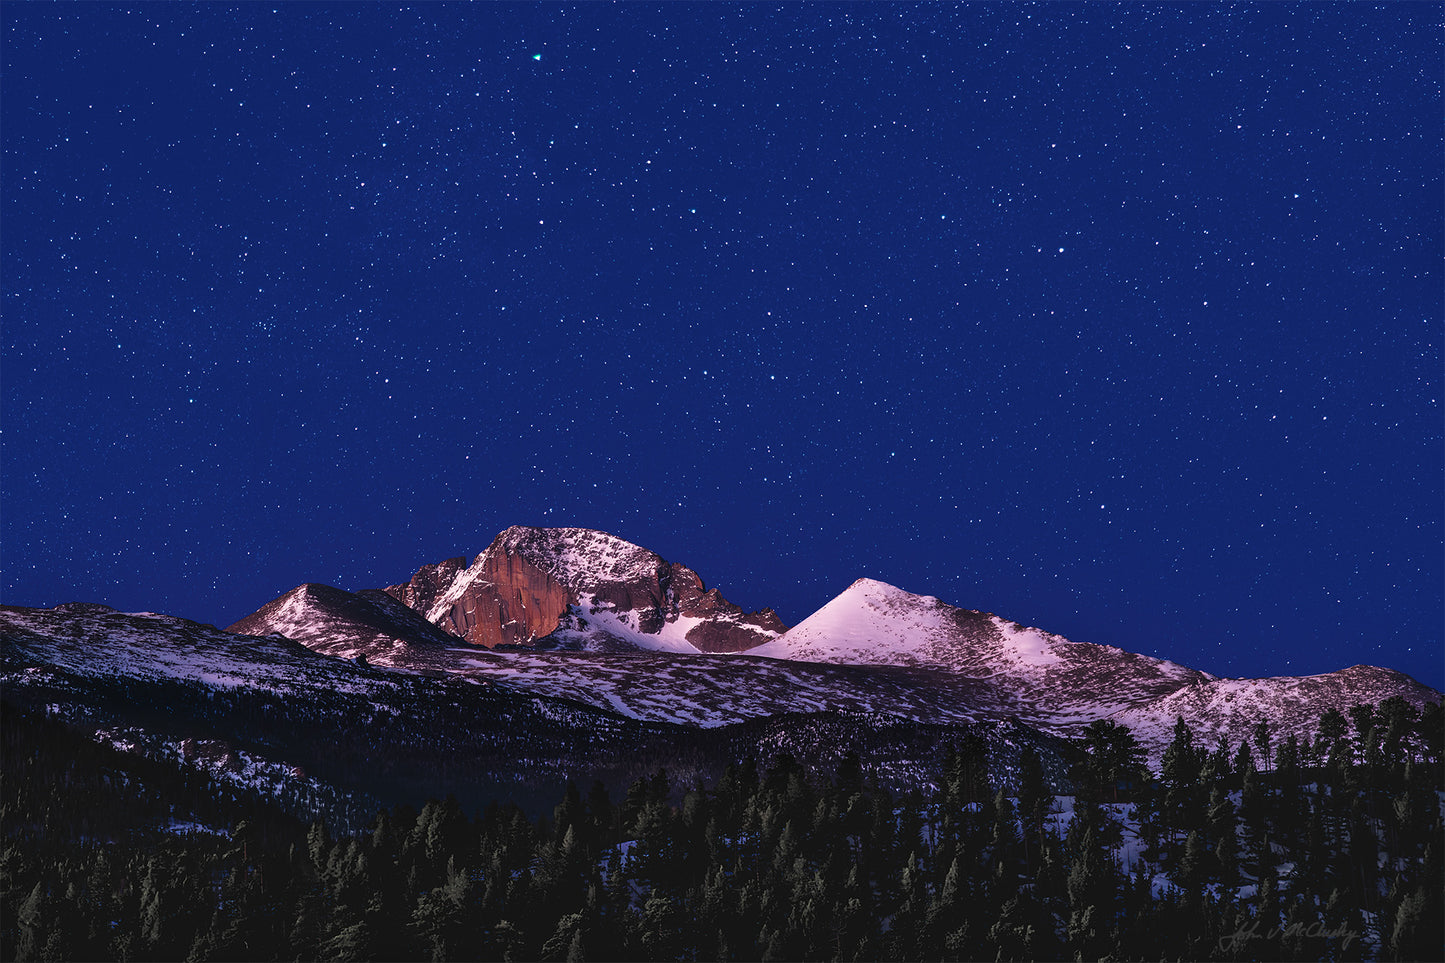 While waiting for a dawn shot, I was blown away by the way the horizon's first light lit Long's Peak and the foreground pines while yet allowing the stars to glow in the dark sky. This composite fine art landscape photography print recreates my awe at that sight.